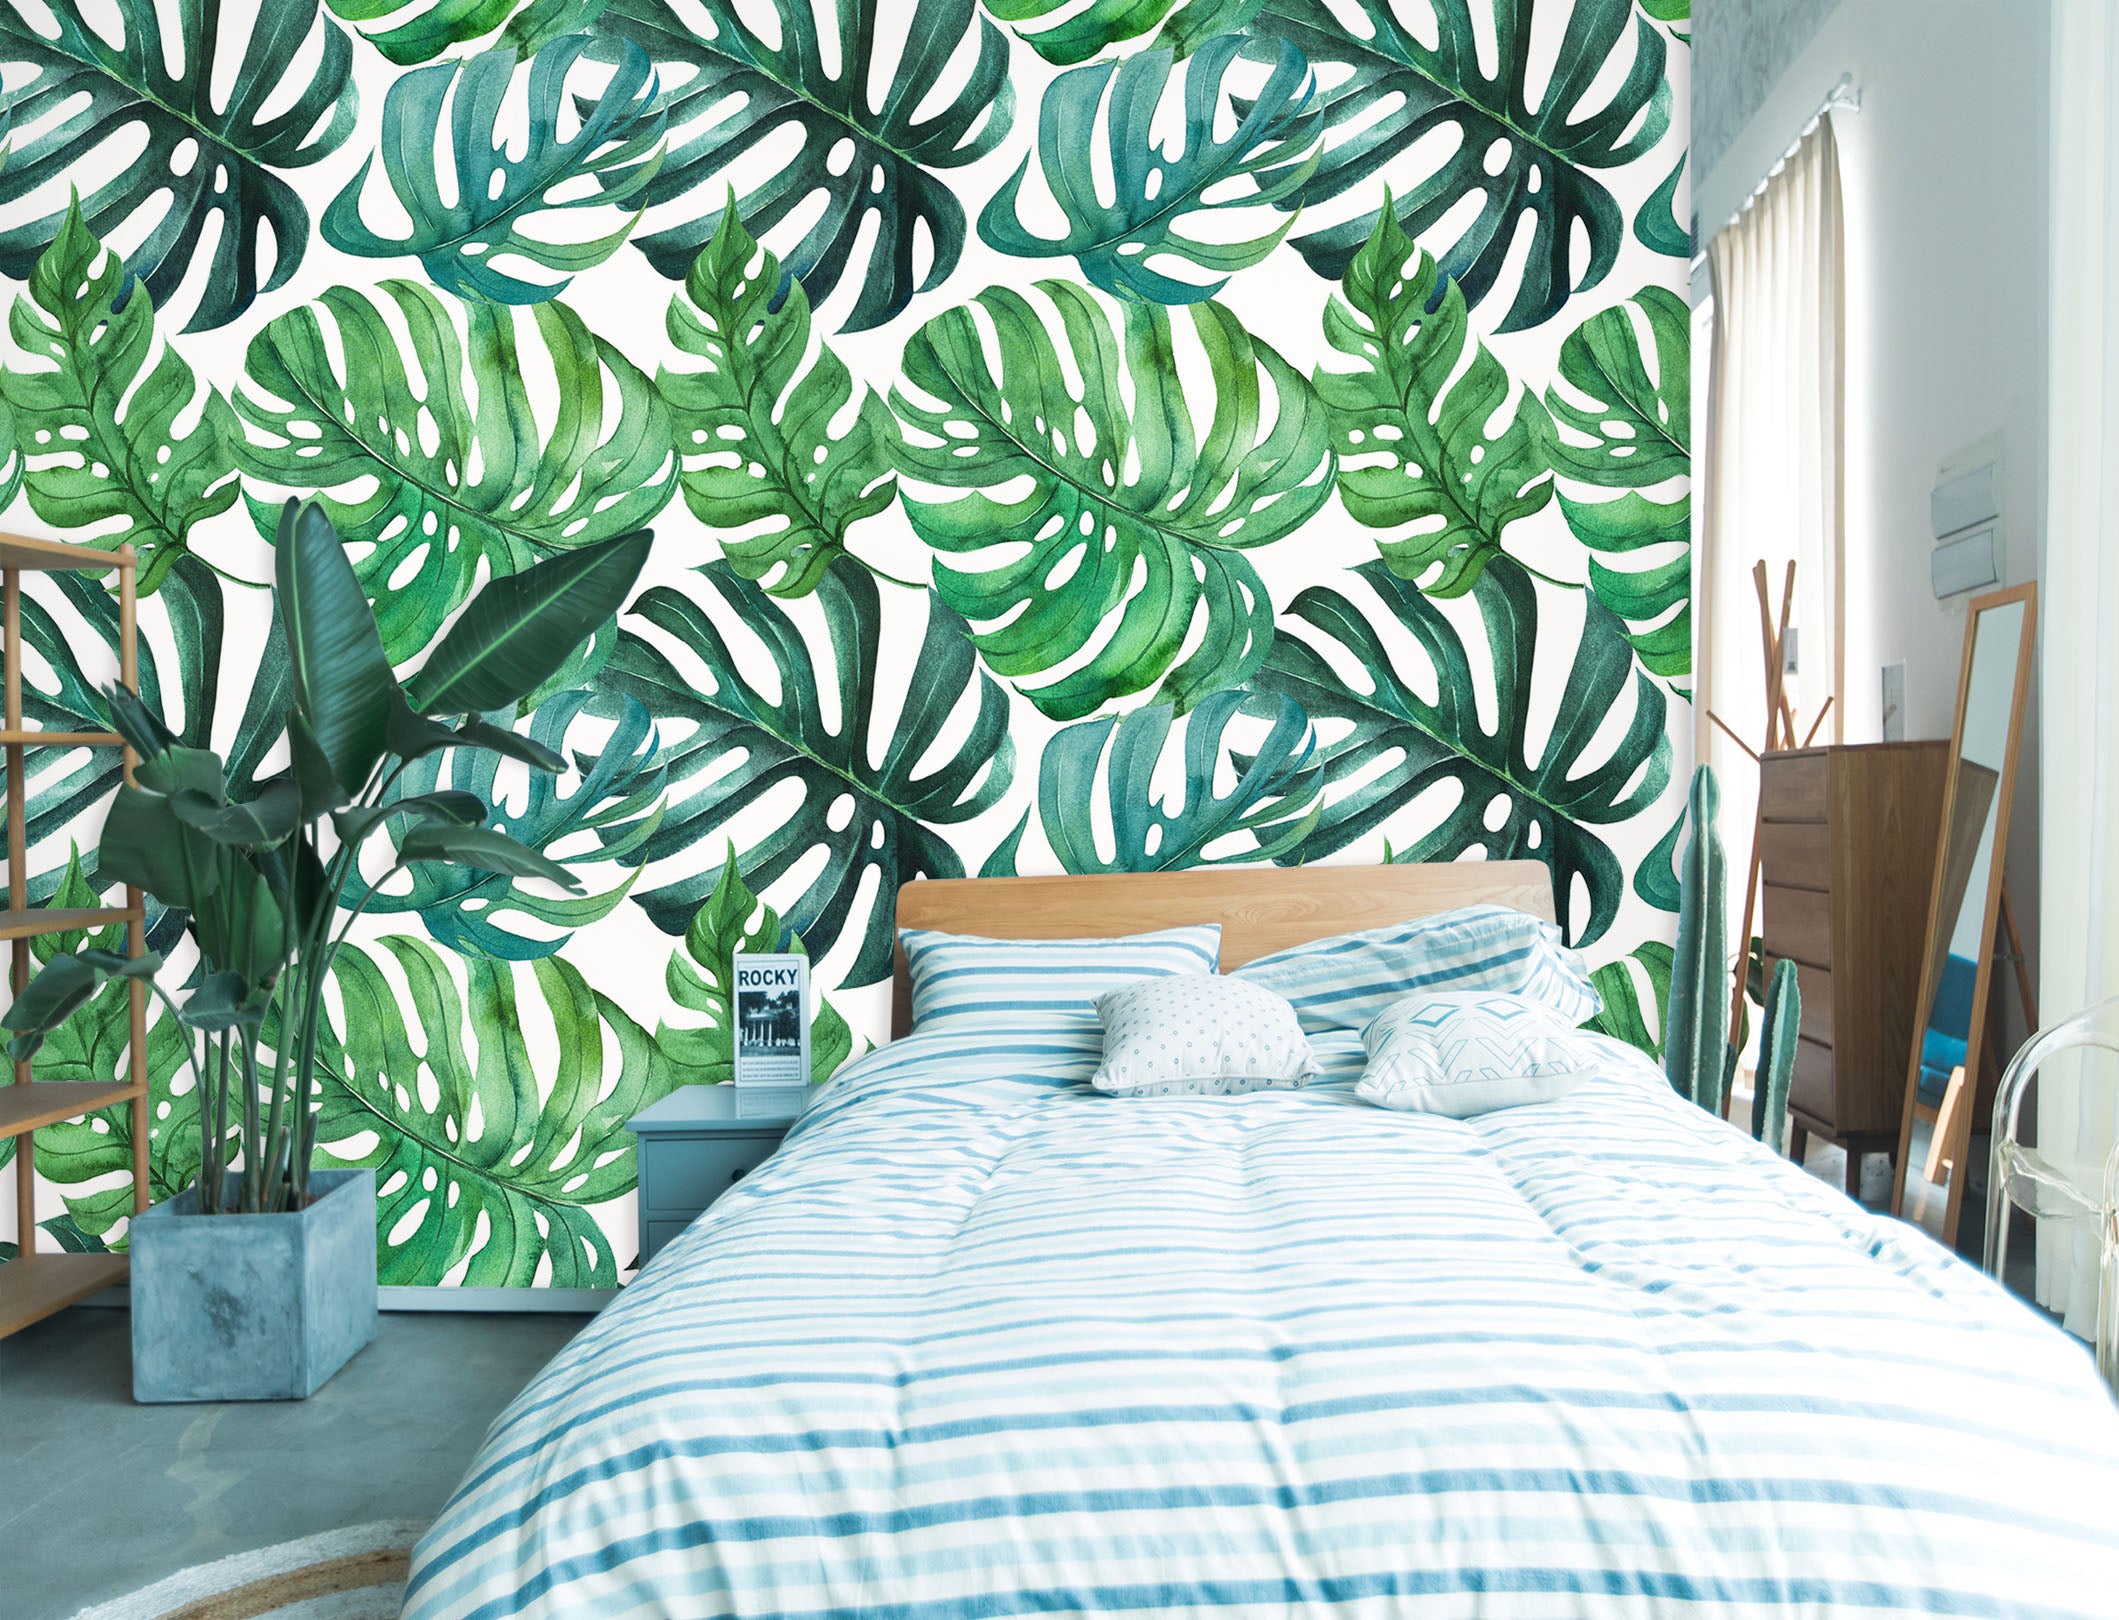 3D Leaves 58171 Wall Murals